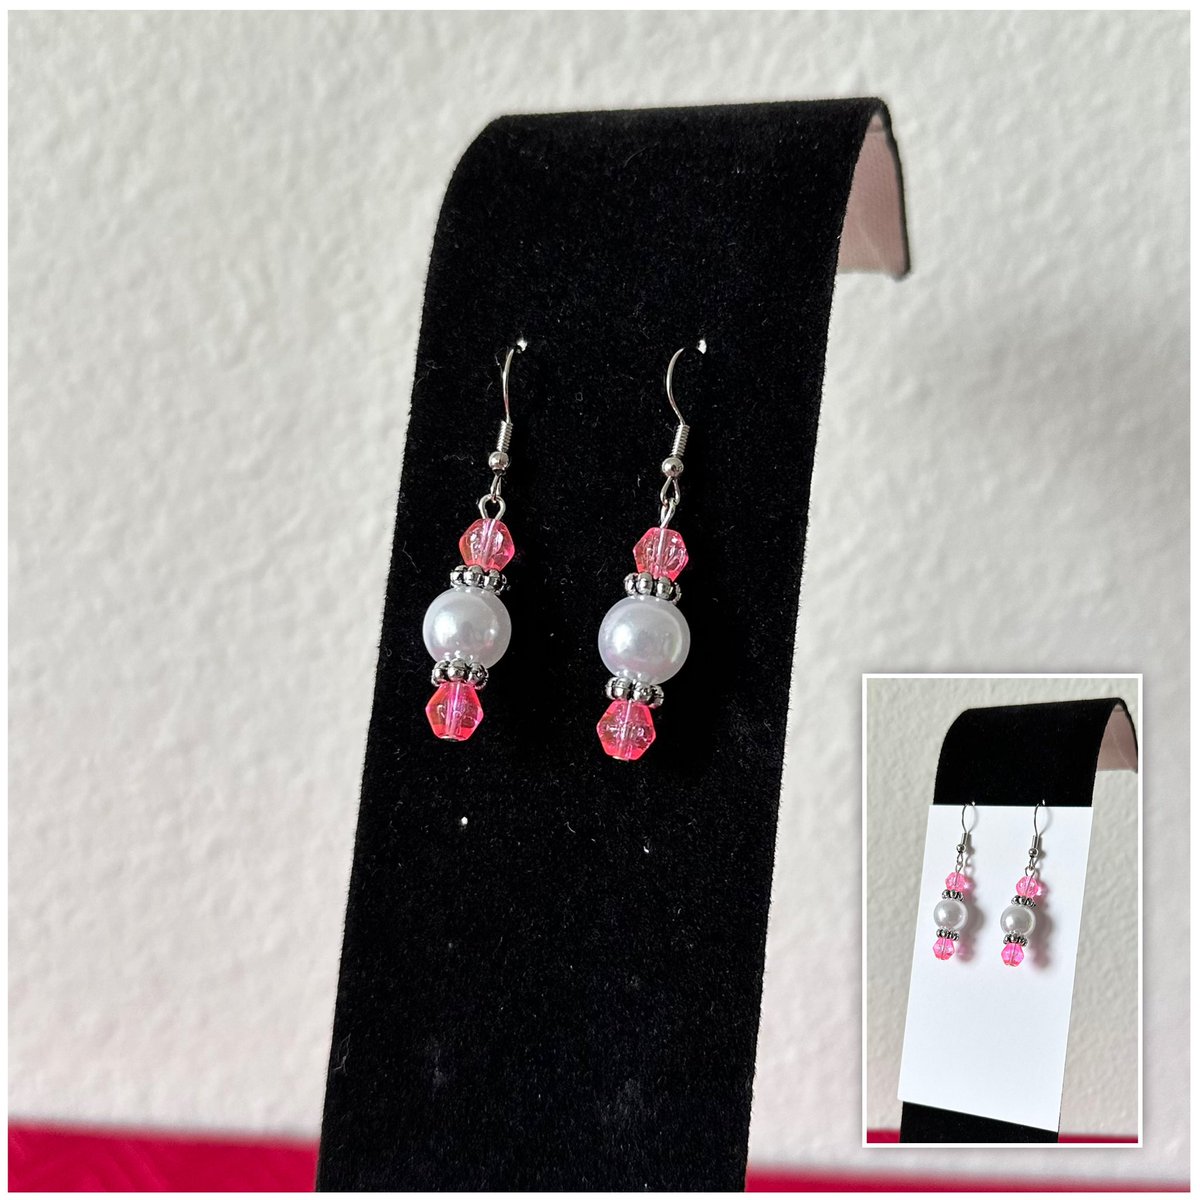 Princess Bride Earrings
(Lighting can affect the way these earrings look) 

Available in my Square shop:
justaskcassie.square.site/product/prince…

#earrings #cuteearrings #princessbride #bridalearrings #fairytalewedding #uniqueearrings #bridaljewelry